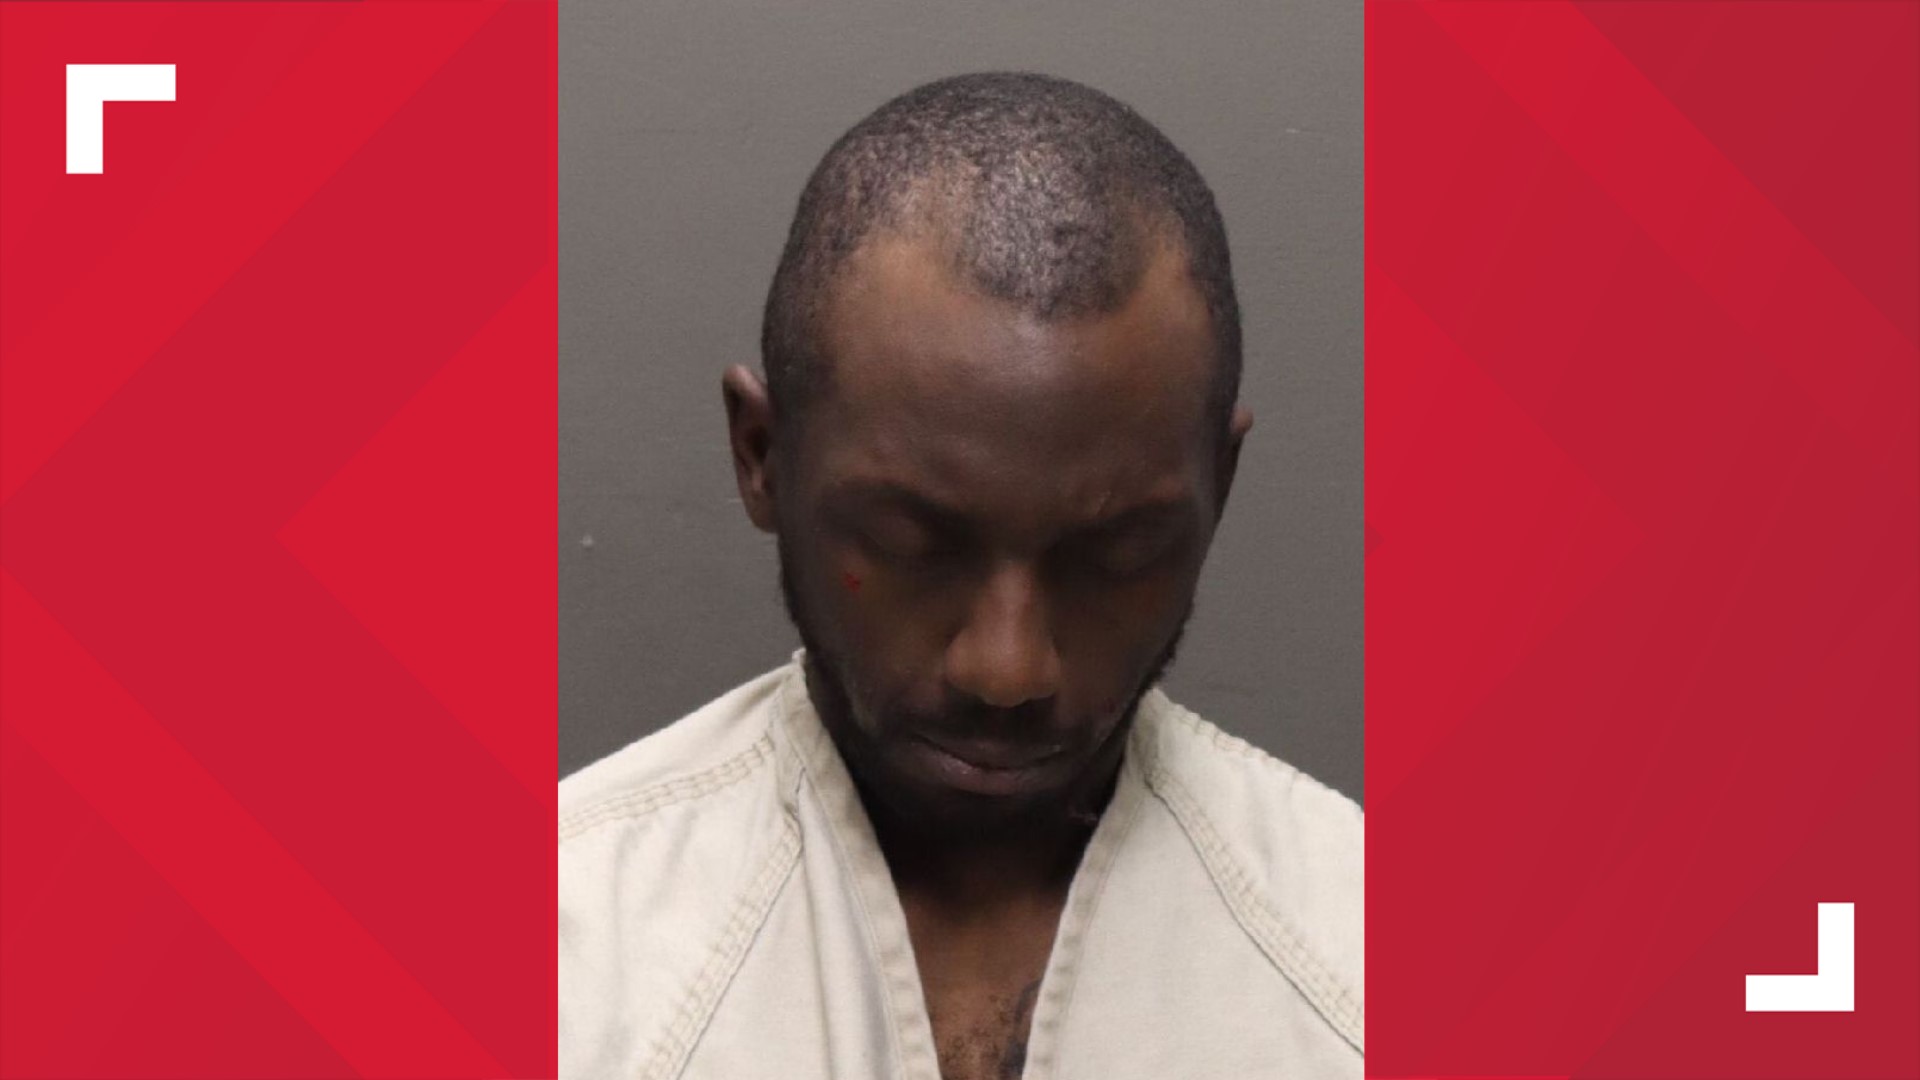 Bryan Benjamin, 36, was charged with attempted murder and felonious assault for the incident which happened on Feb. 20 near East Linden.